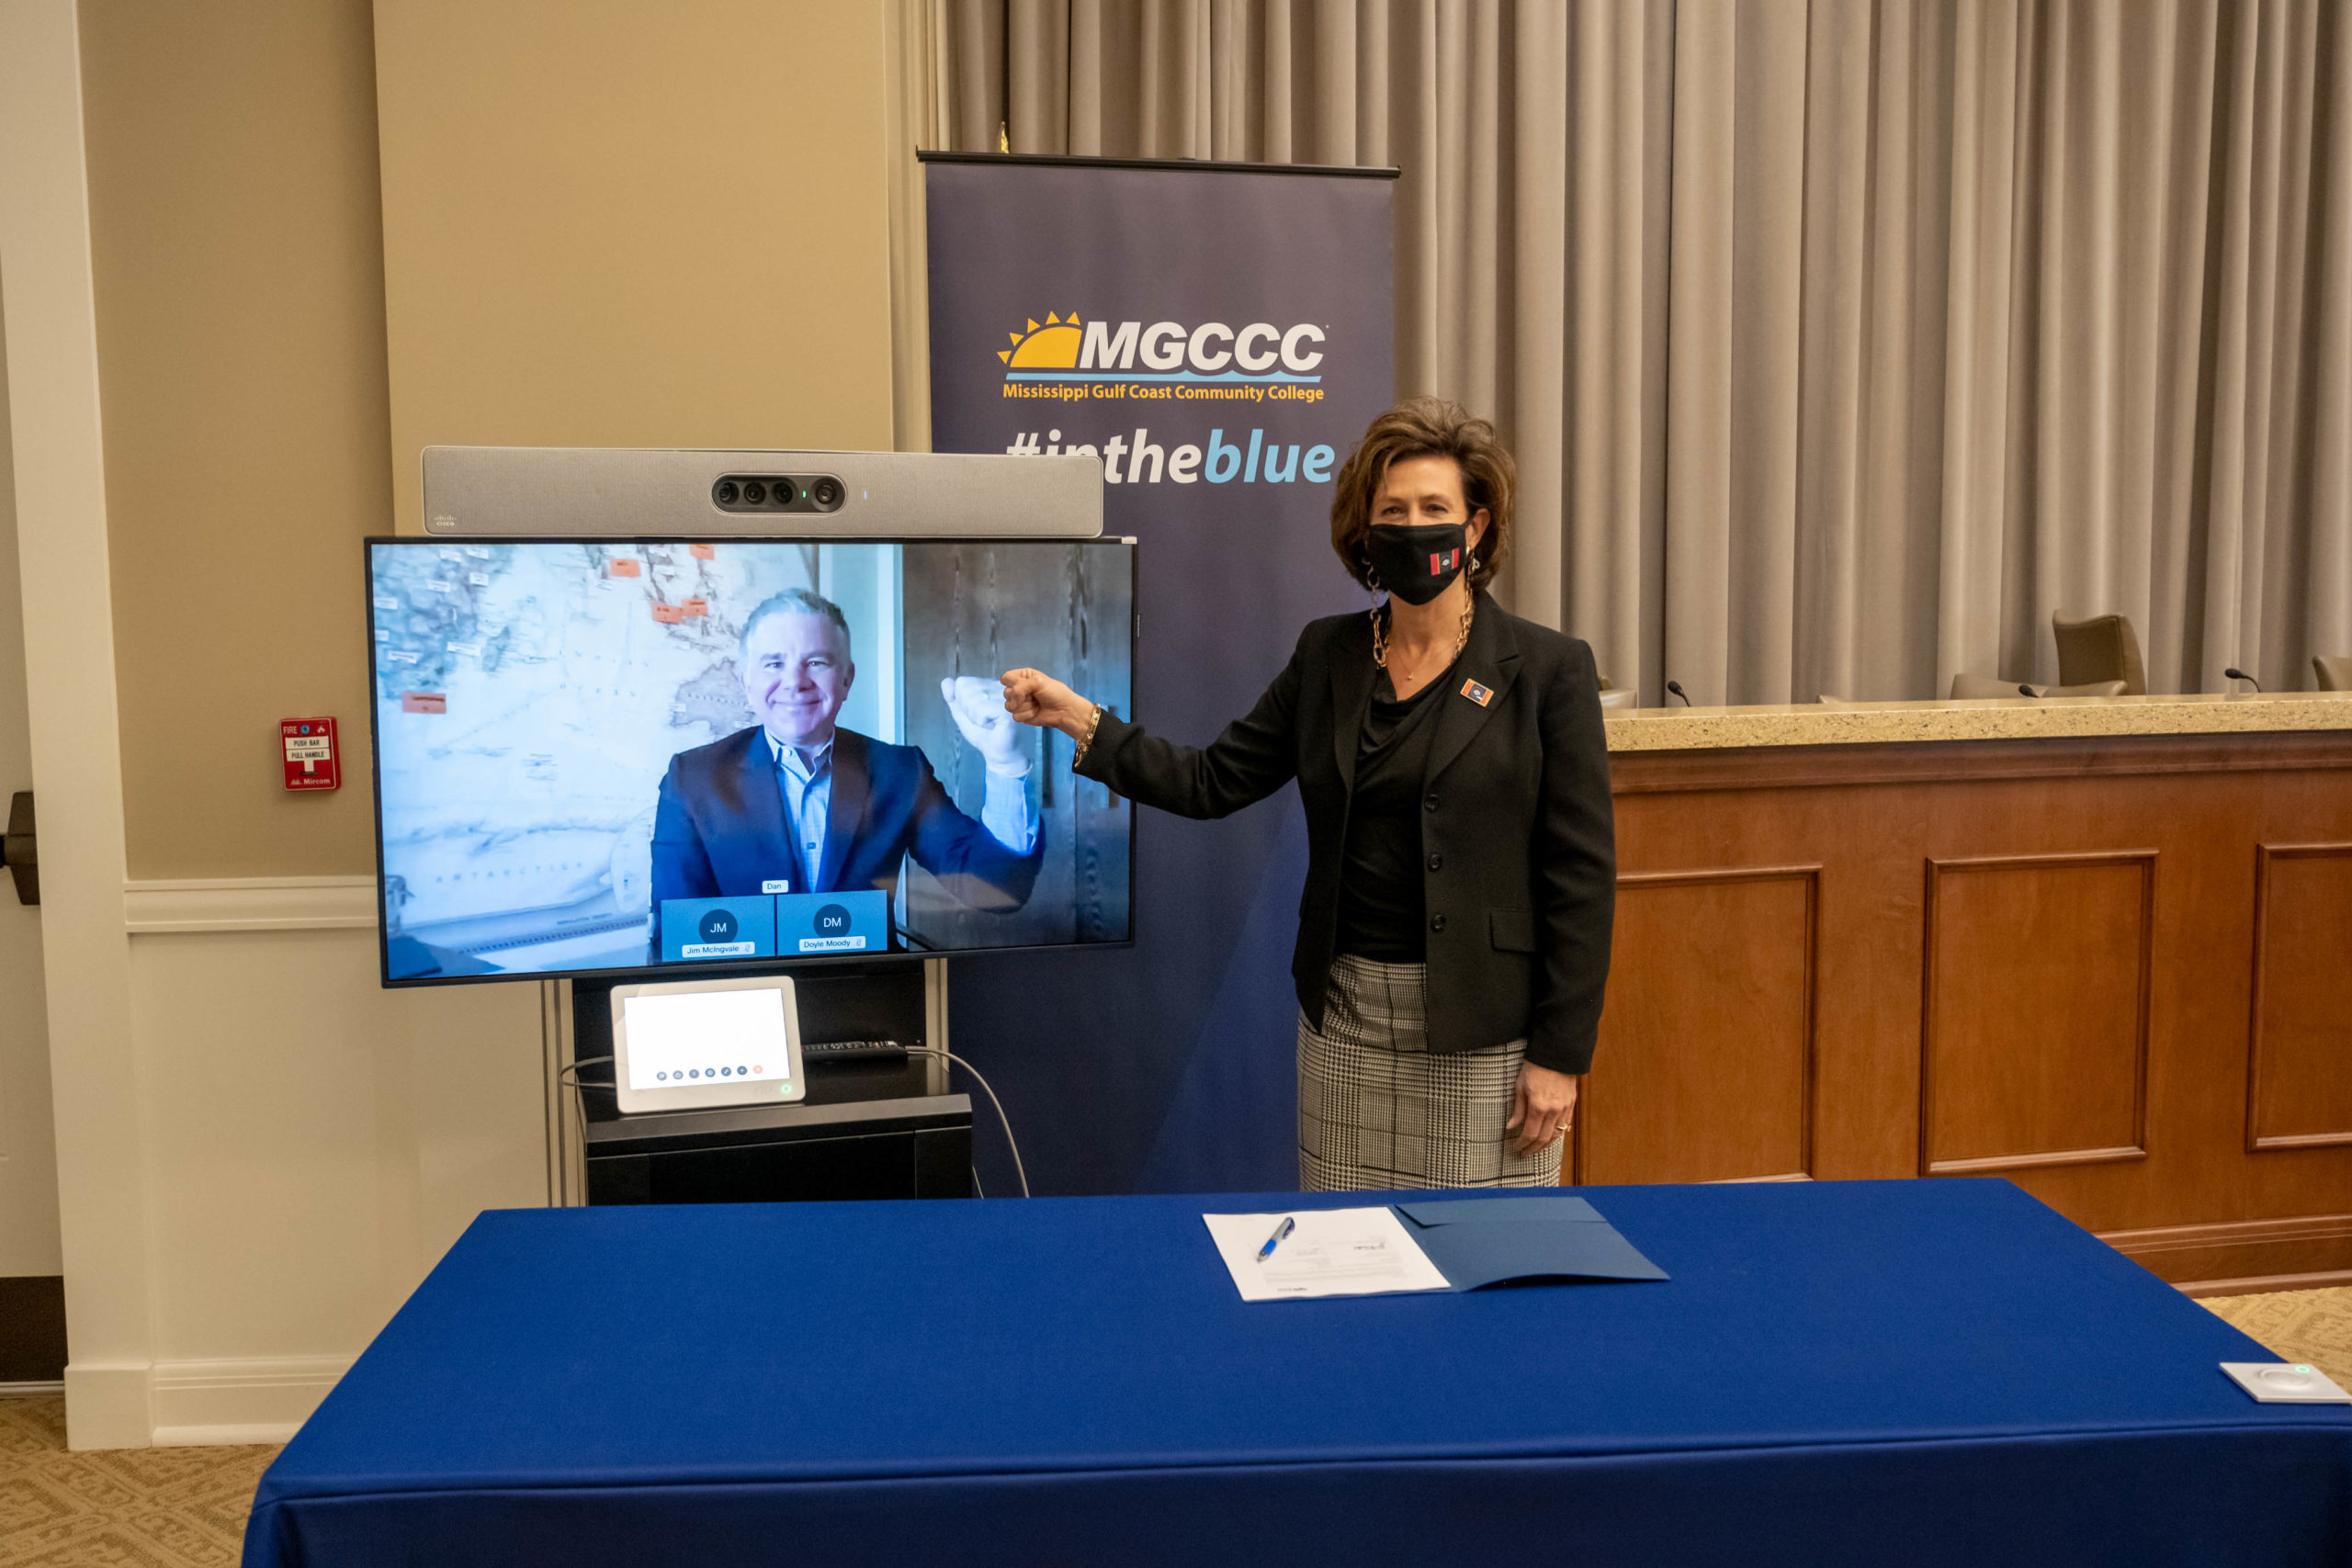 Dr. Mary Graham, MGCCC president gives a virtual “fist-bump” to Dan Lejerskar, founder of EON Reality, during their virtual signing meeting on Wednesday, January 13.